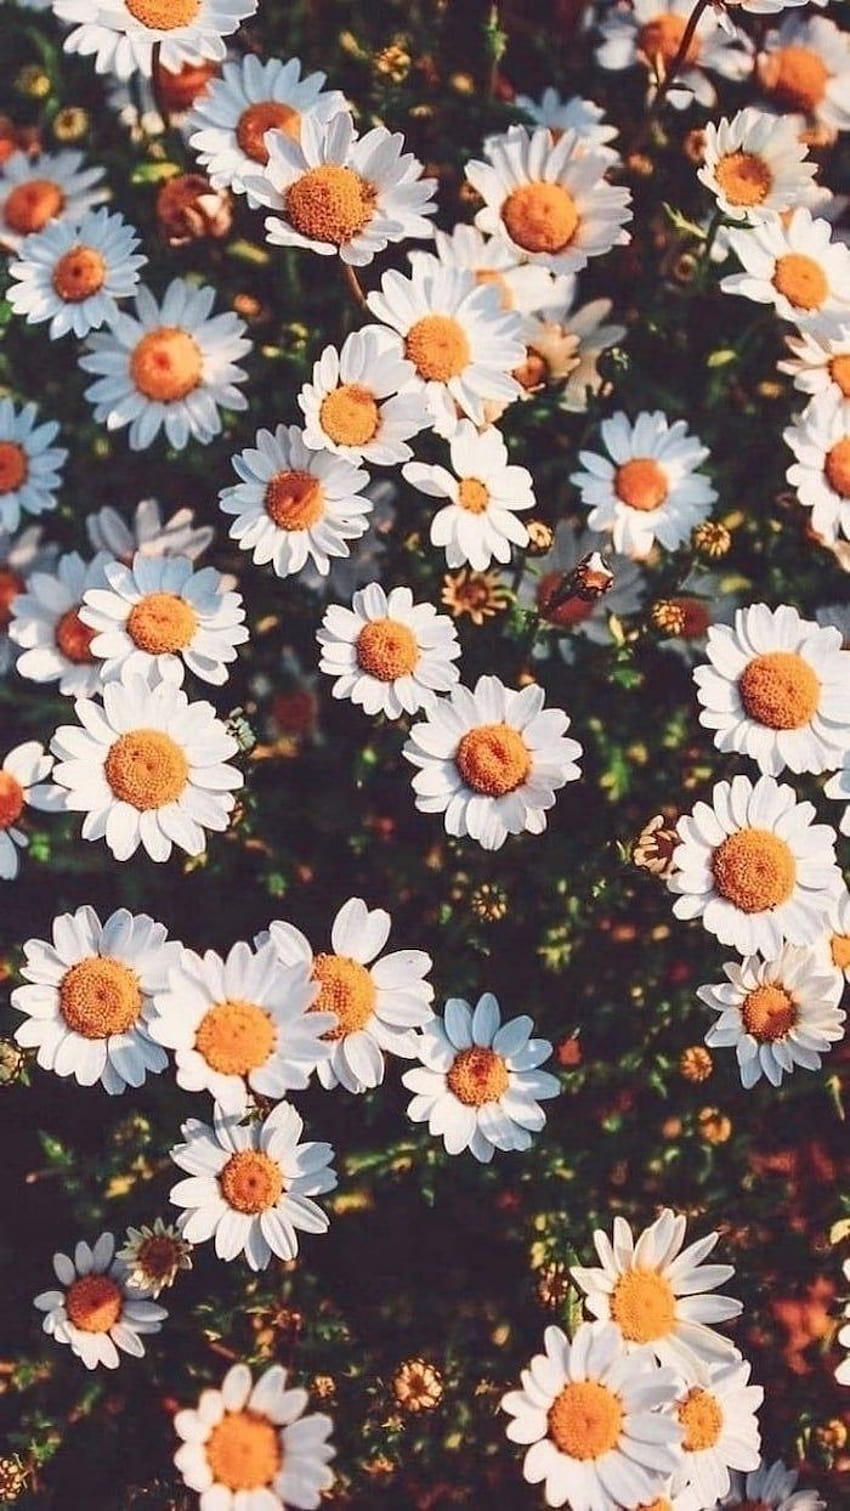 A field of daisies with a black background - Daisy